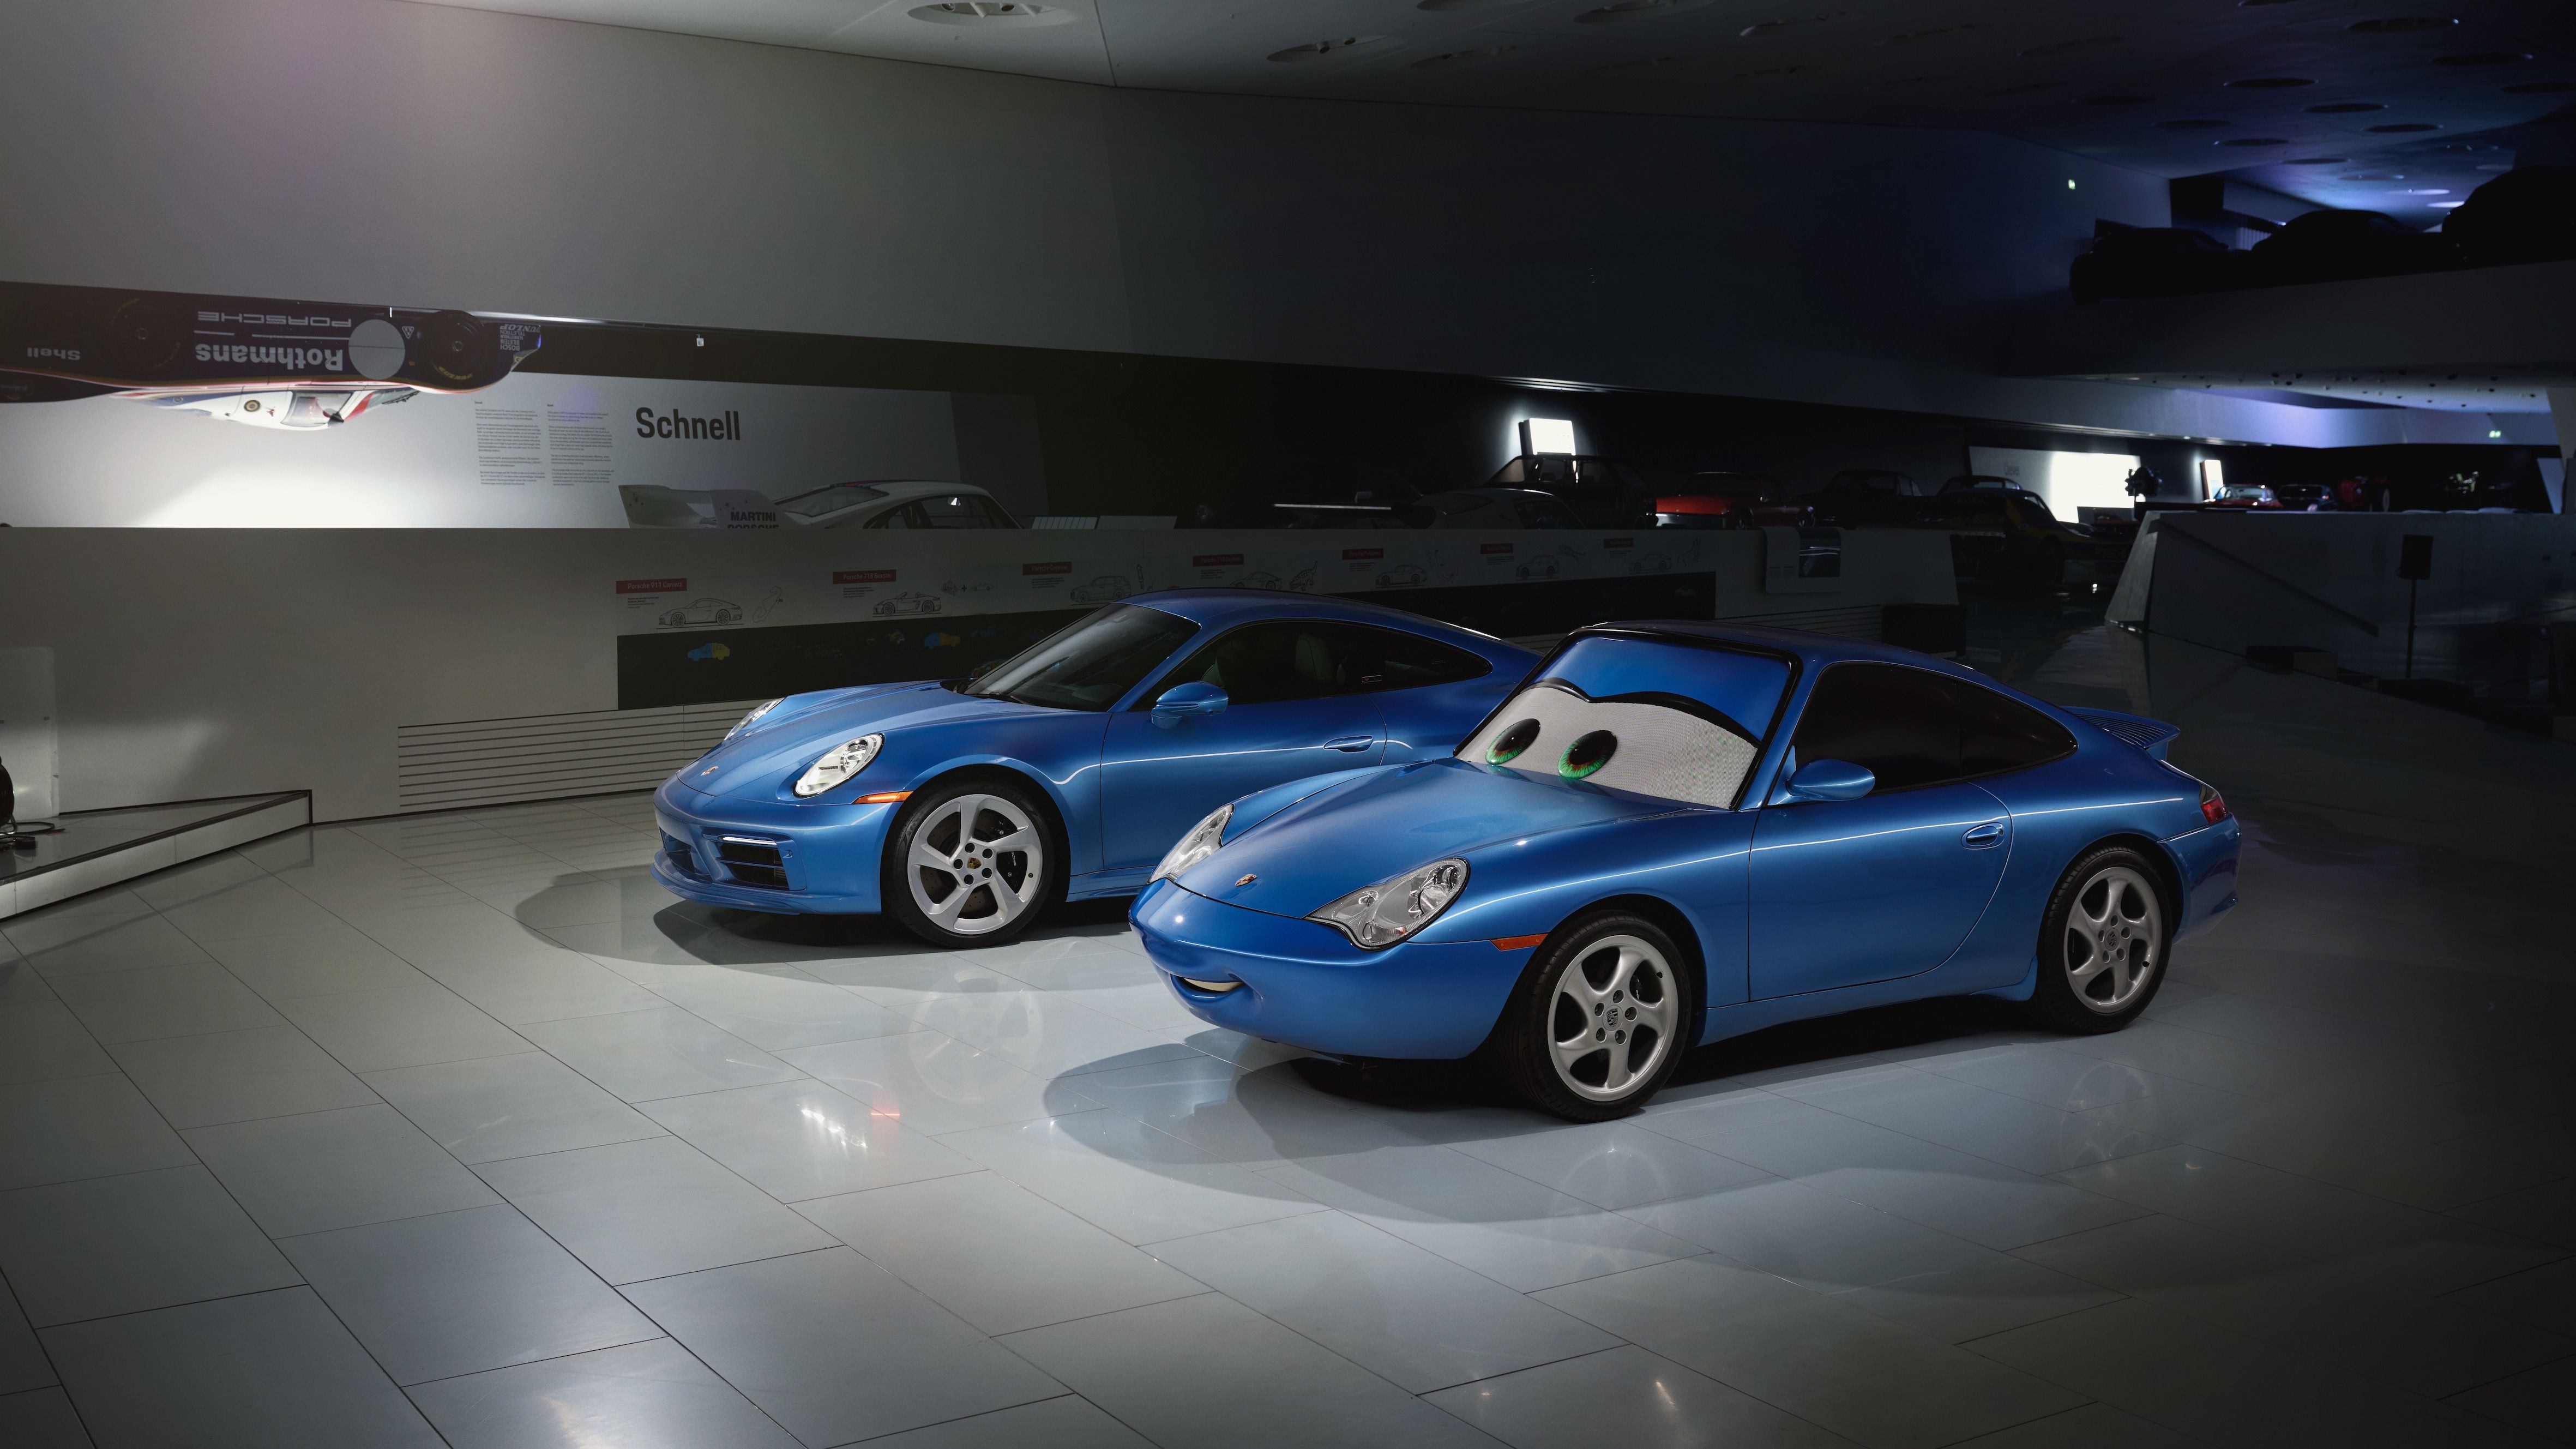 Porsche Built a Tribute to Sally Carrera. We Built the Real One